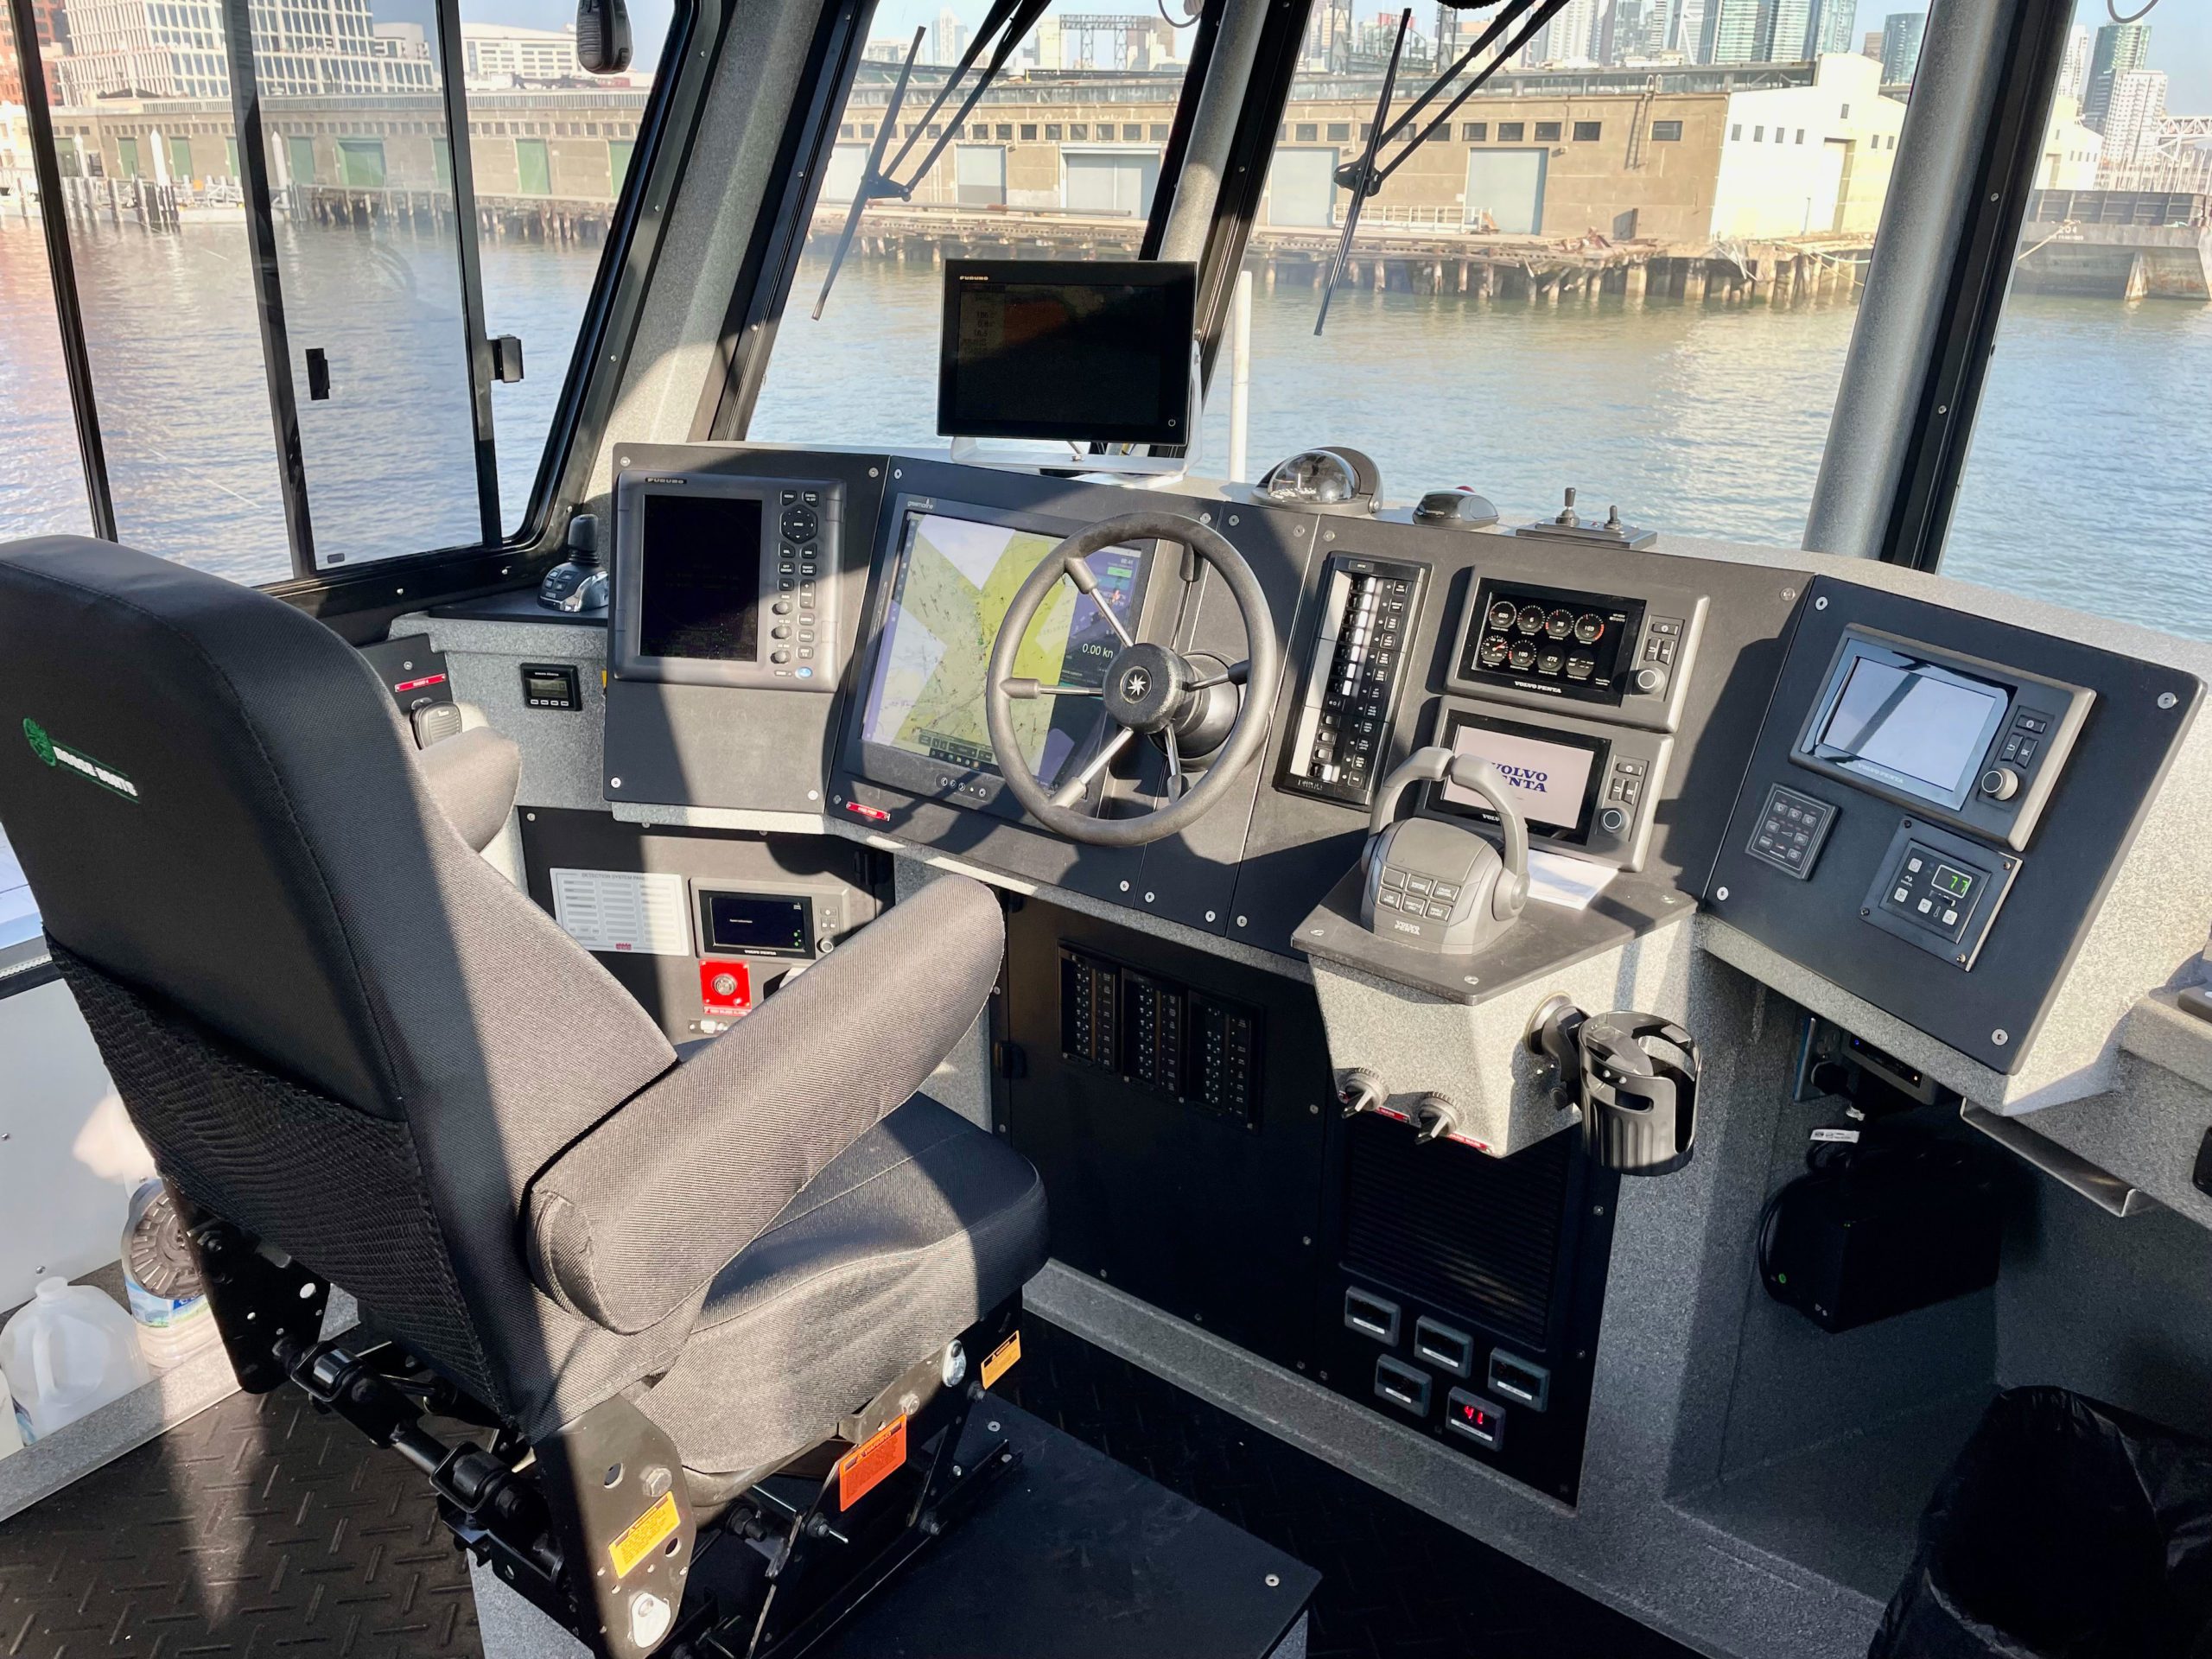 The wheelhouse offers better all-around views than the other Westar launches.